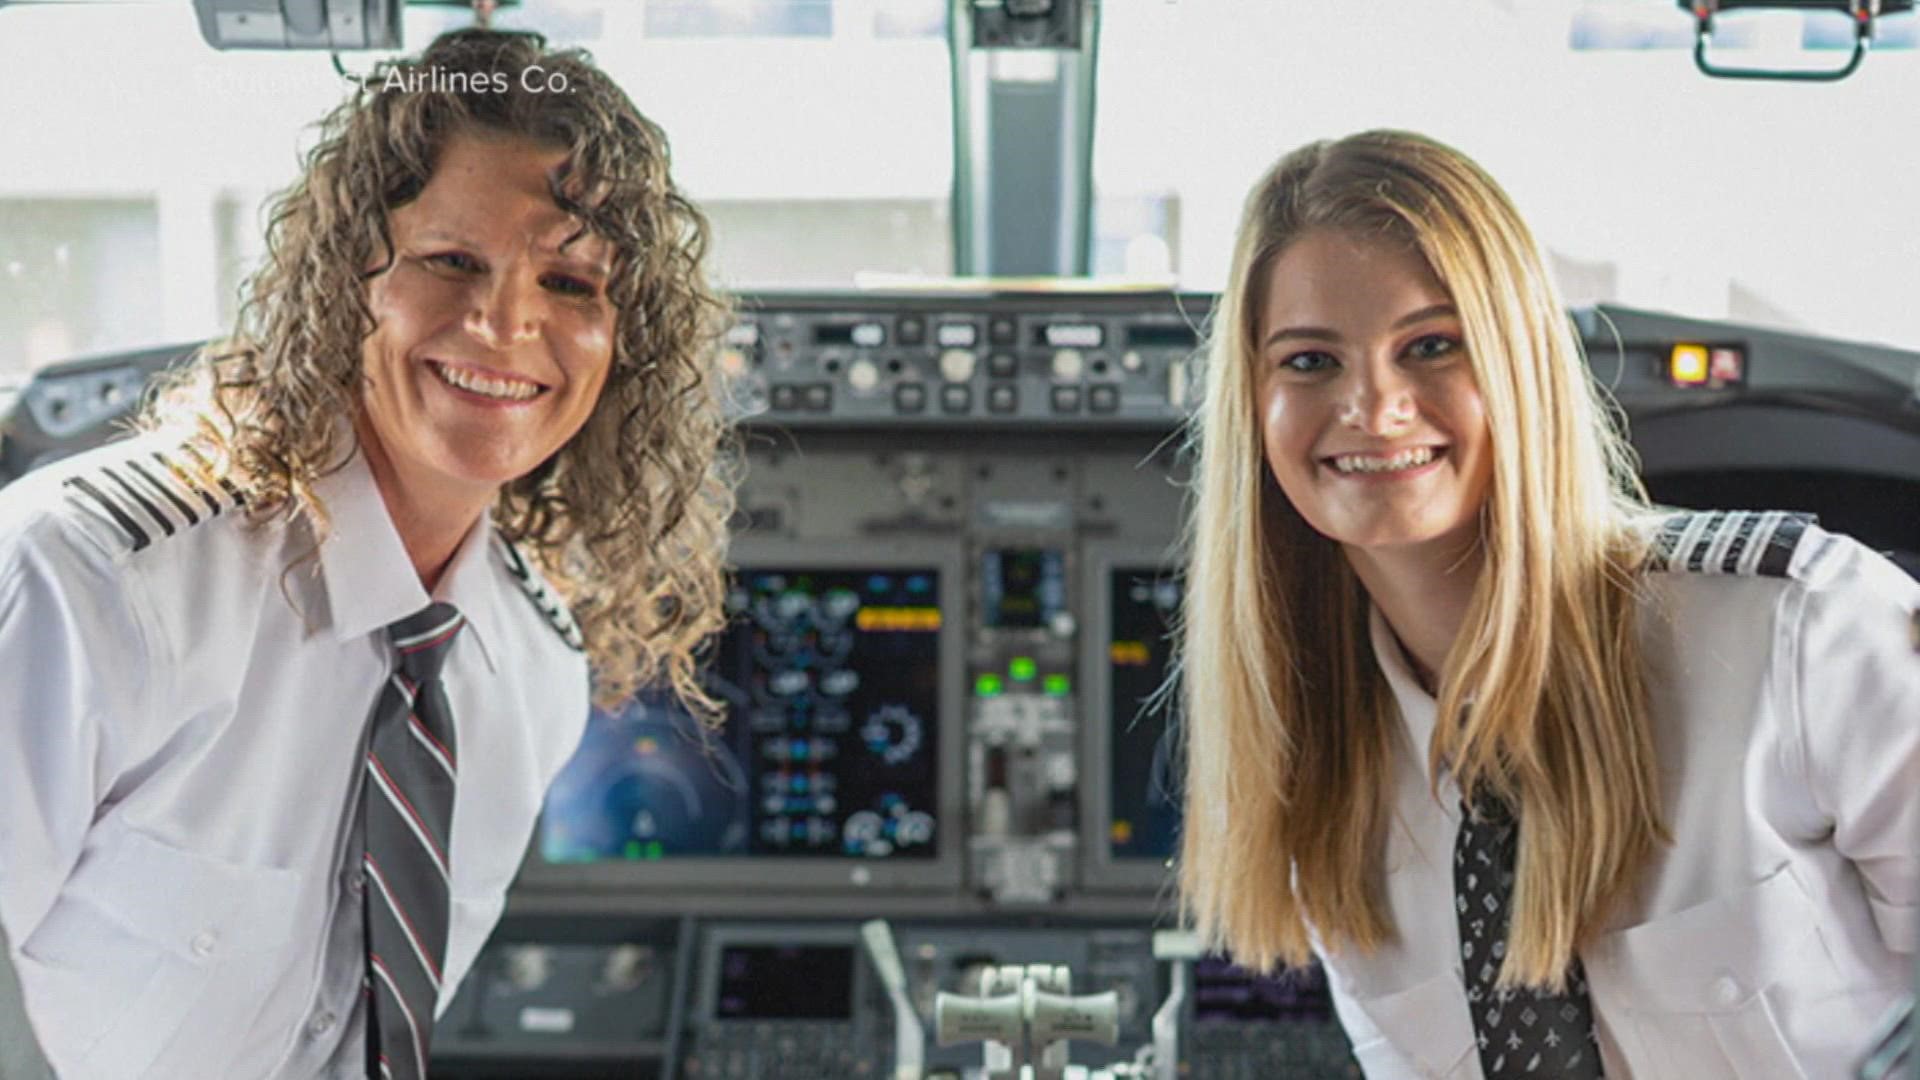 Capt. Holly dreamed of being a pilot for years. Her daughter, Capt. Keely, was happy to fly under her mom's wings.